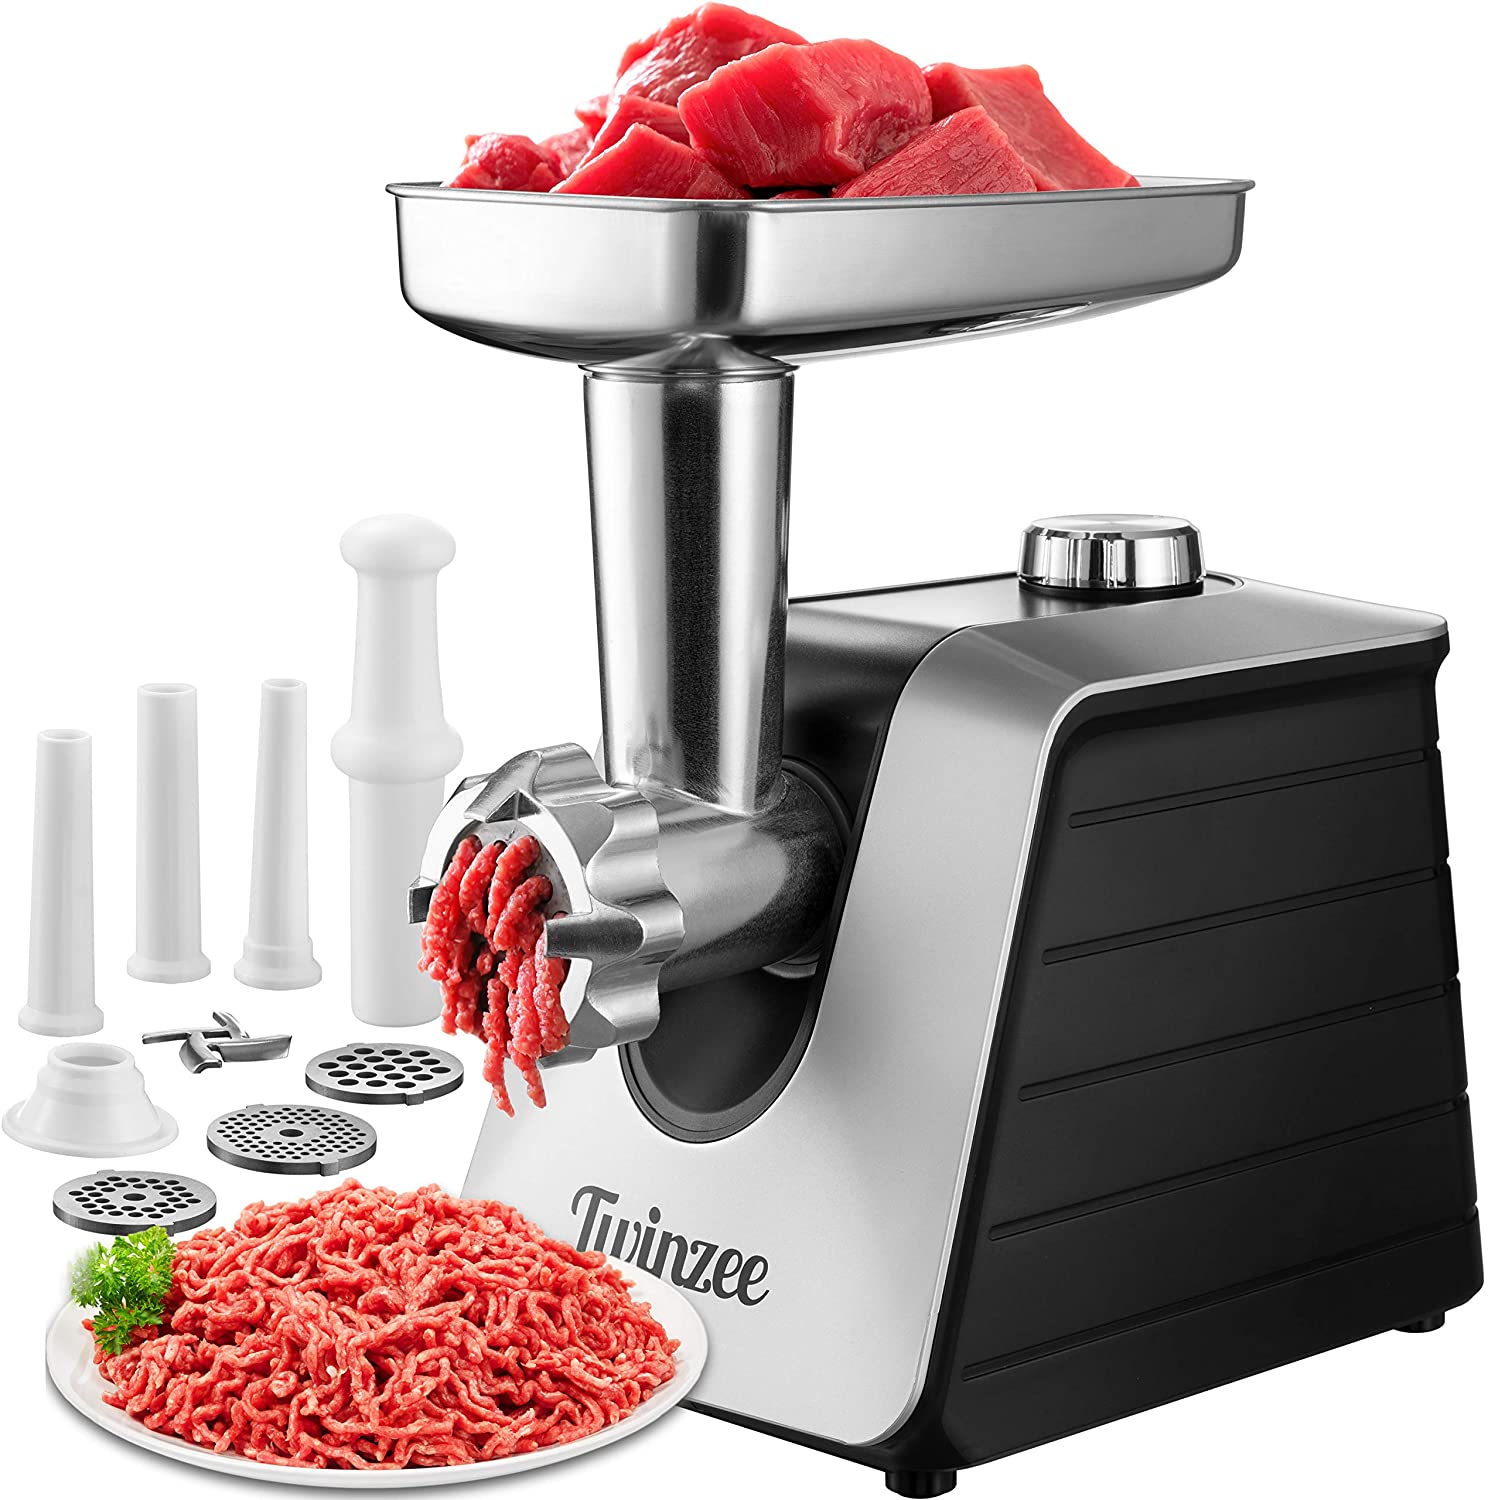 3. Twinzee Electric Meat Grinder